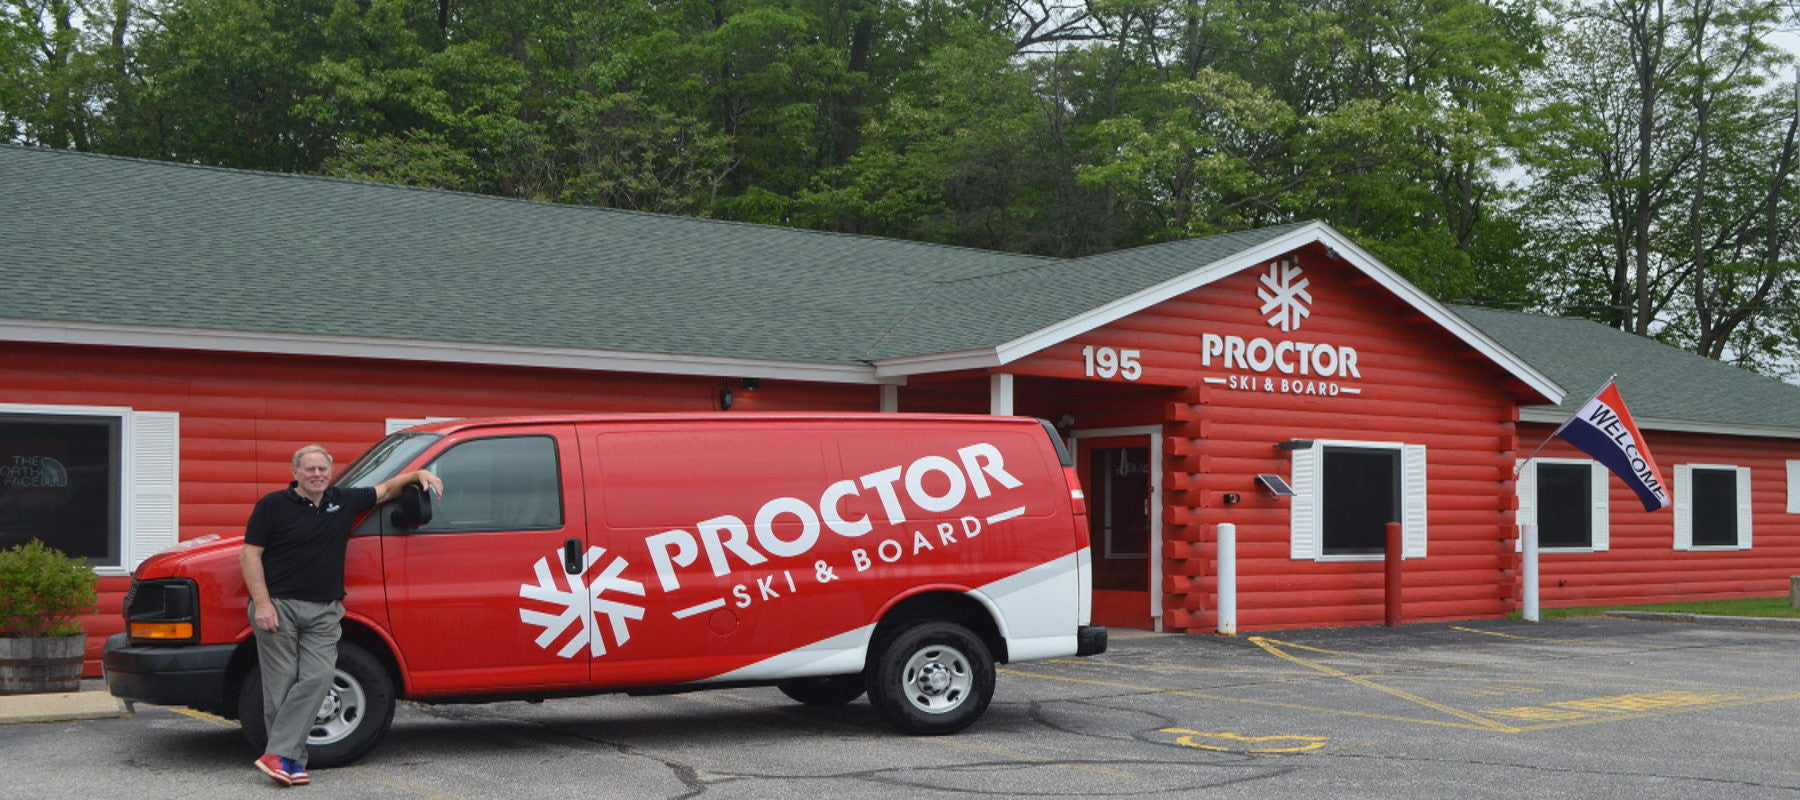 Proctor ski & Board, specialty ski shop in Nashua NH. Providing the best ski & Snowboard brands and clothing. Carrying Patagonia. Best Deals on best brands.